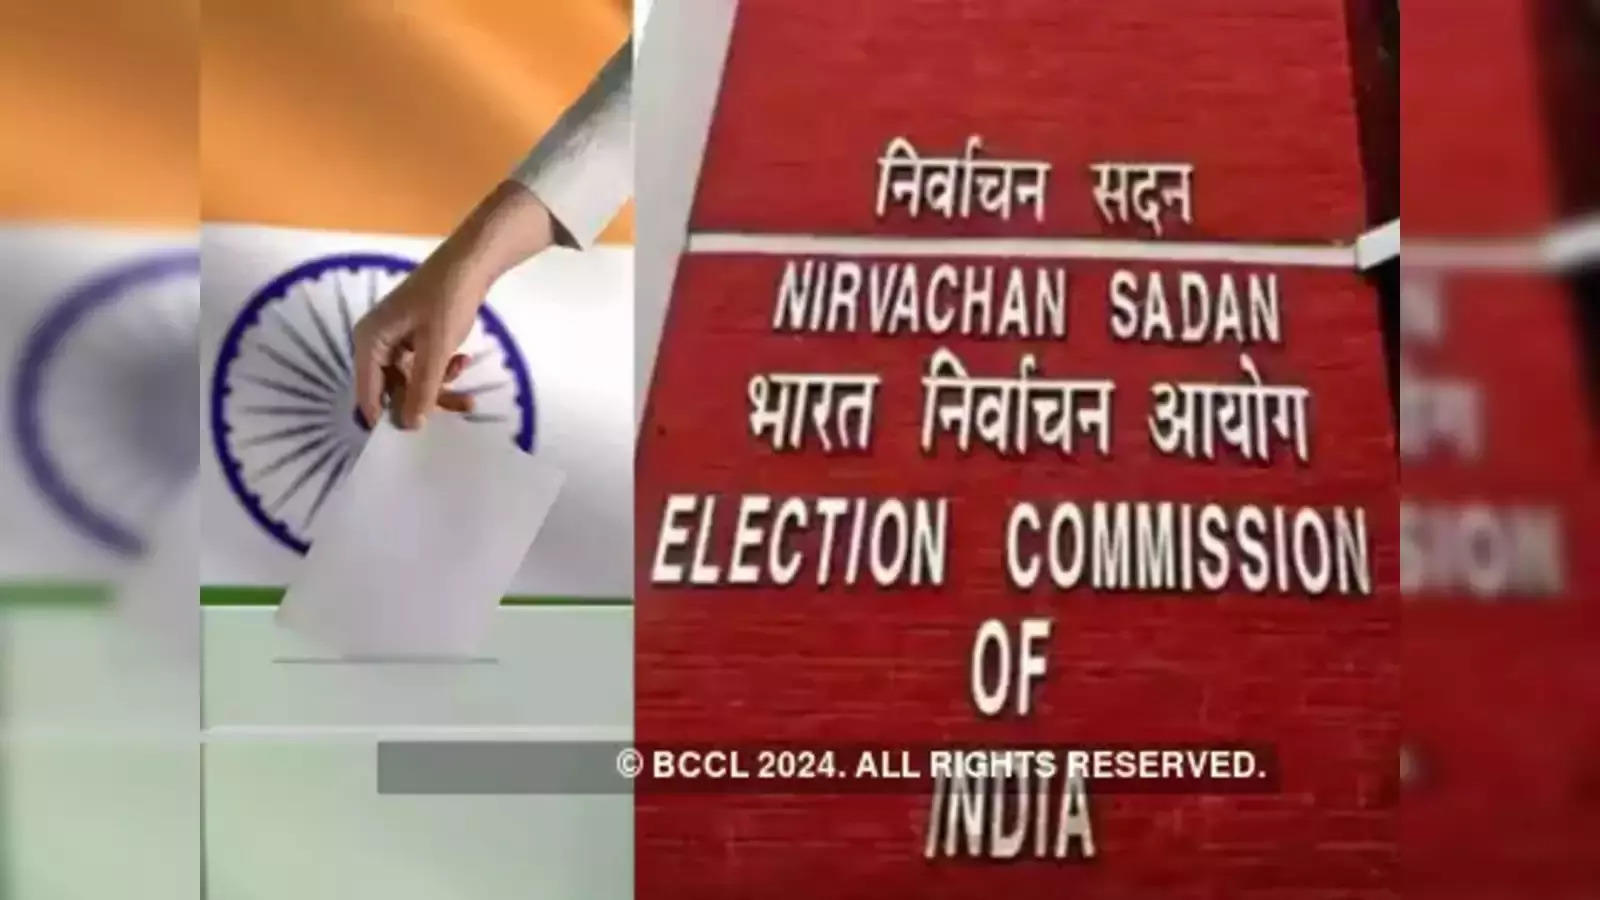 ECI Job: How to get a job in Election Commission? What is the salary of CEC in one month?